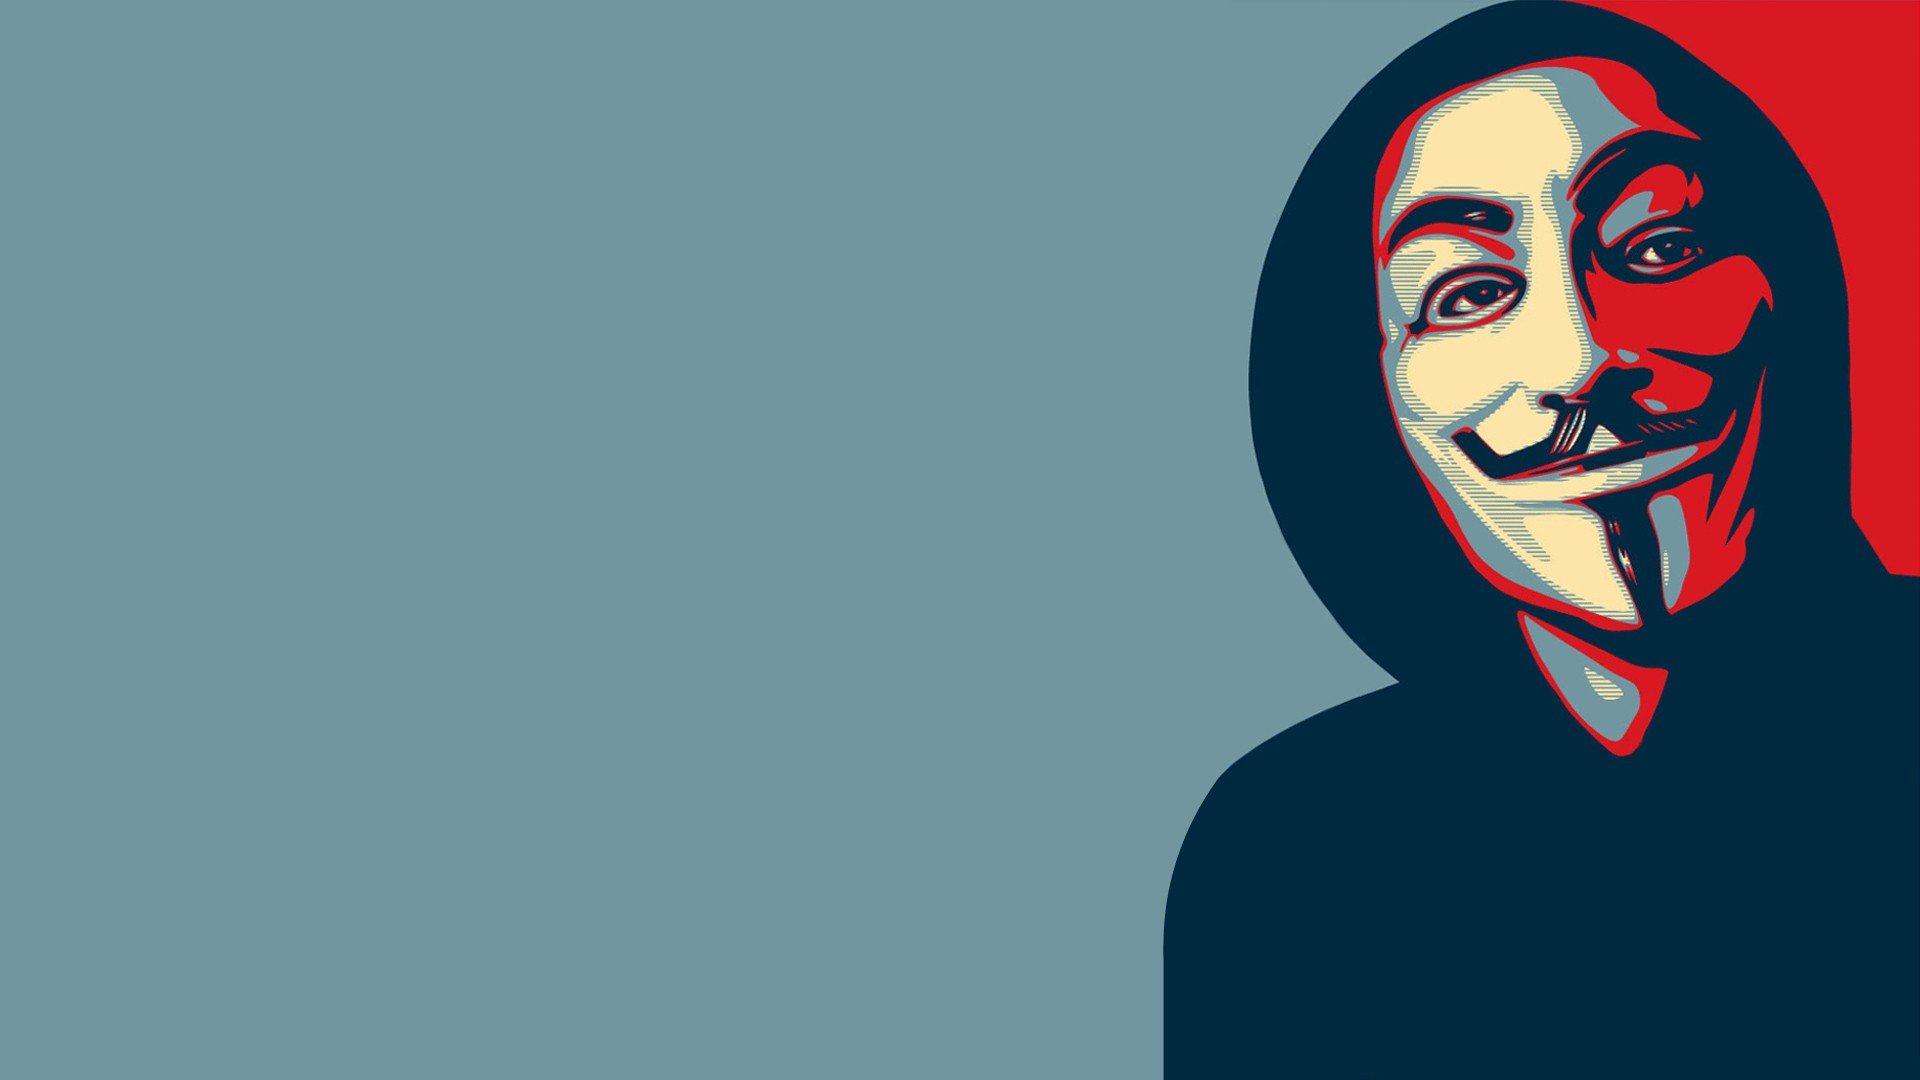 Anonymous, Face, Mask, Minimalism, Guy Fawkes mask, Hope posters Wallpaper